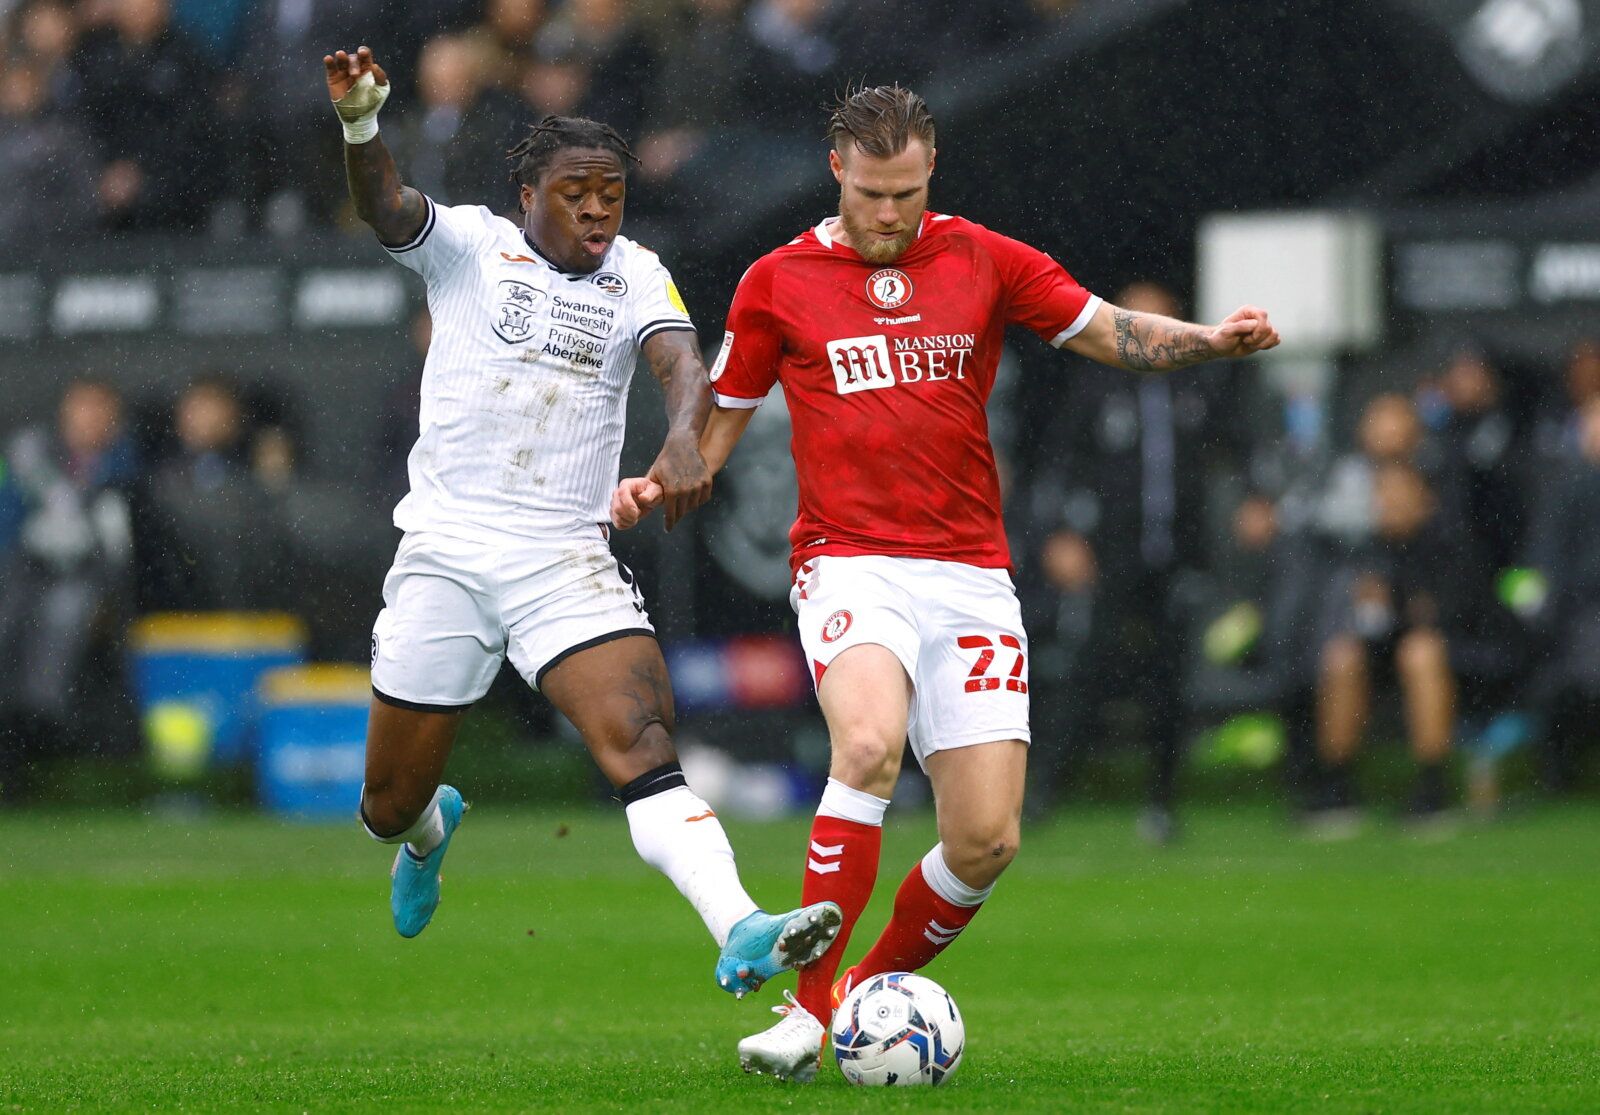 Soccer Football - Championship - Swansea City v Bristol City - Swansea.com Stadium, Swansea, Britain - February 13, 2022 Swansea City's Michael Obafemi in action with Bristol City's Tomas Kalas    Action Images/Andrew Boyers  EDITORIAL USE ONLY. No use with unauthorized audio, video, data, fixture lists, club/league logos or "live" services. Online in-match use limited to 75 images, no video emulation. No use in betting, games or single club/league/player publications.  Please contact your accou